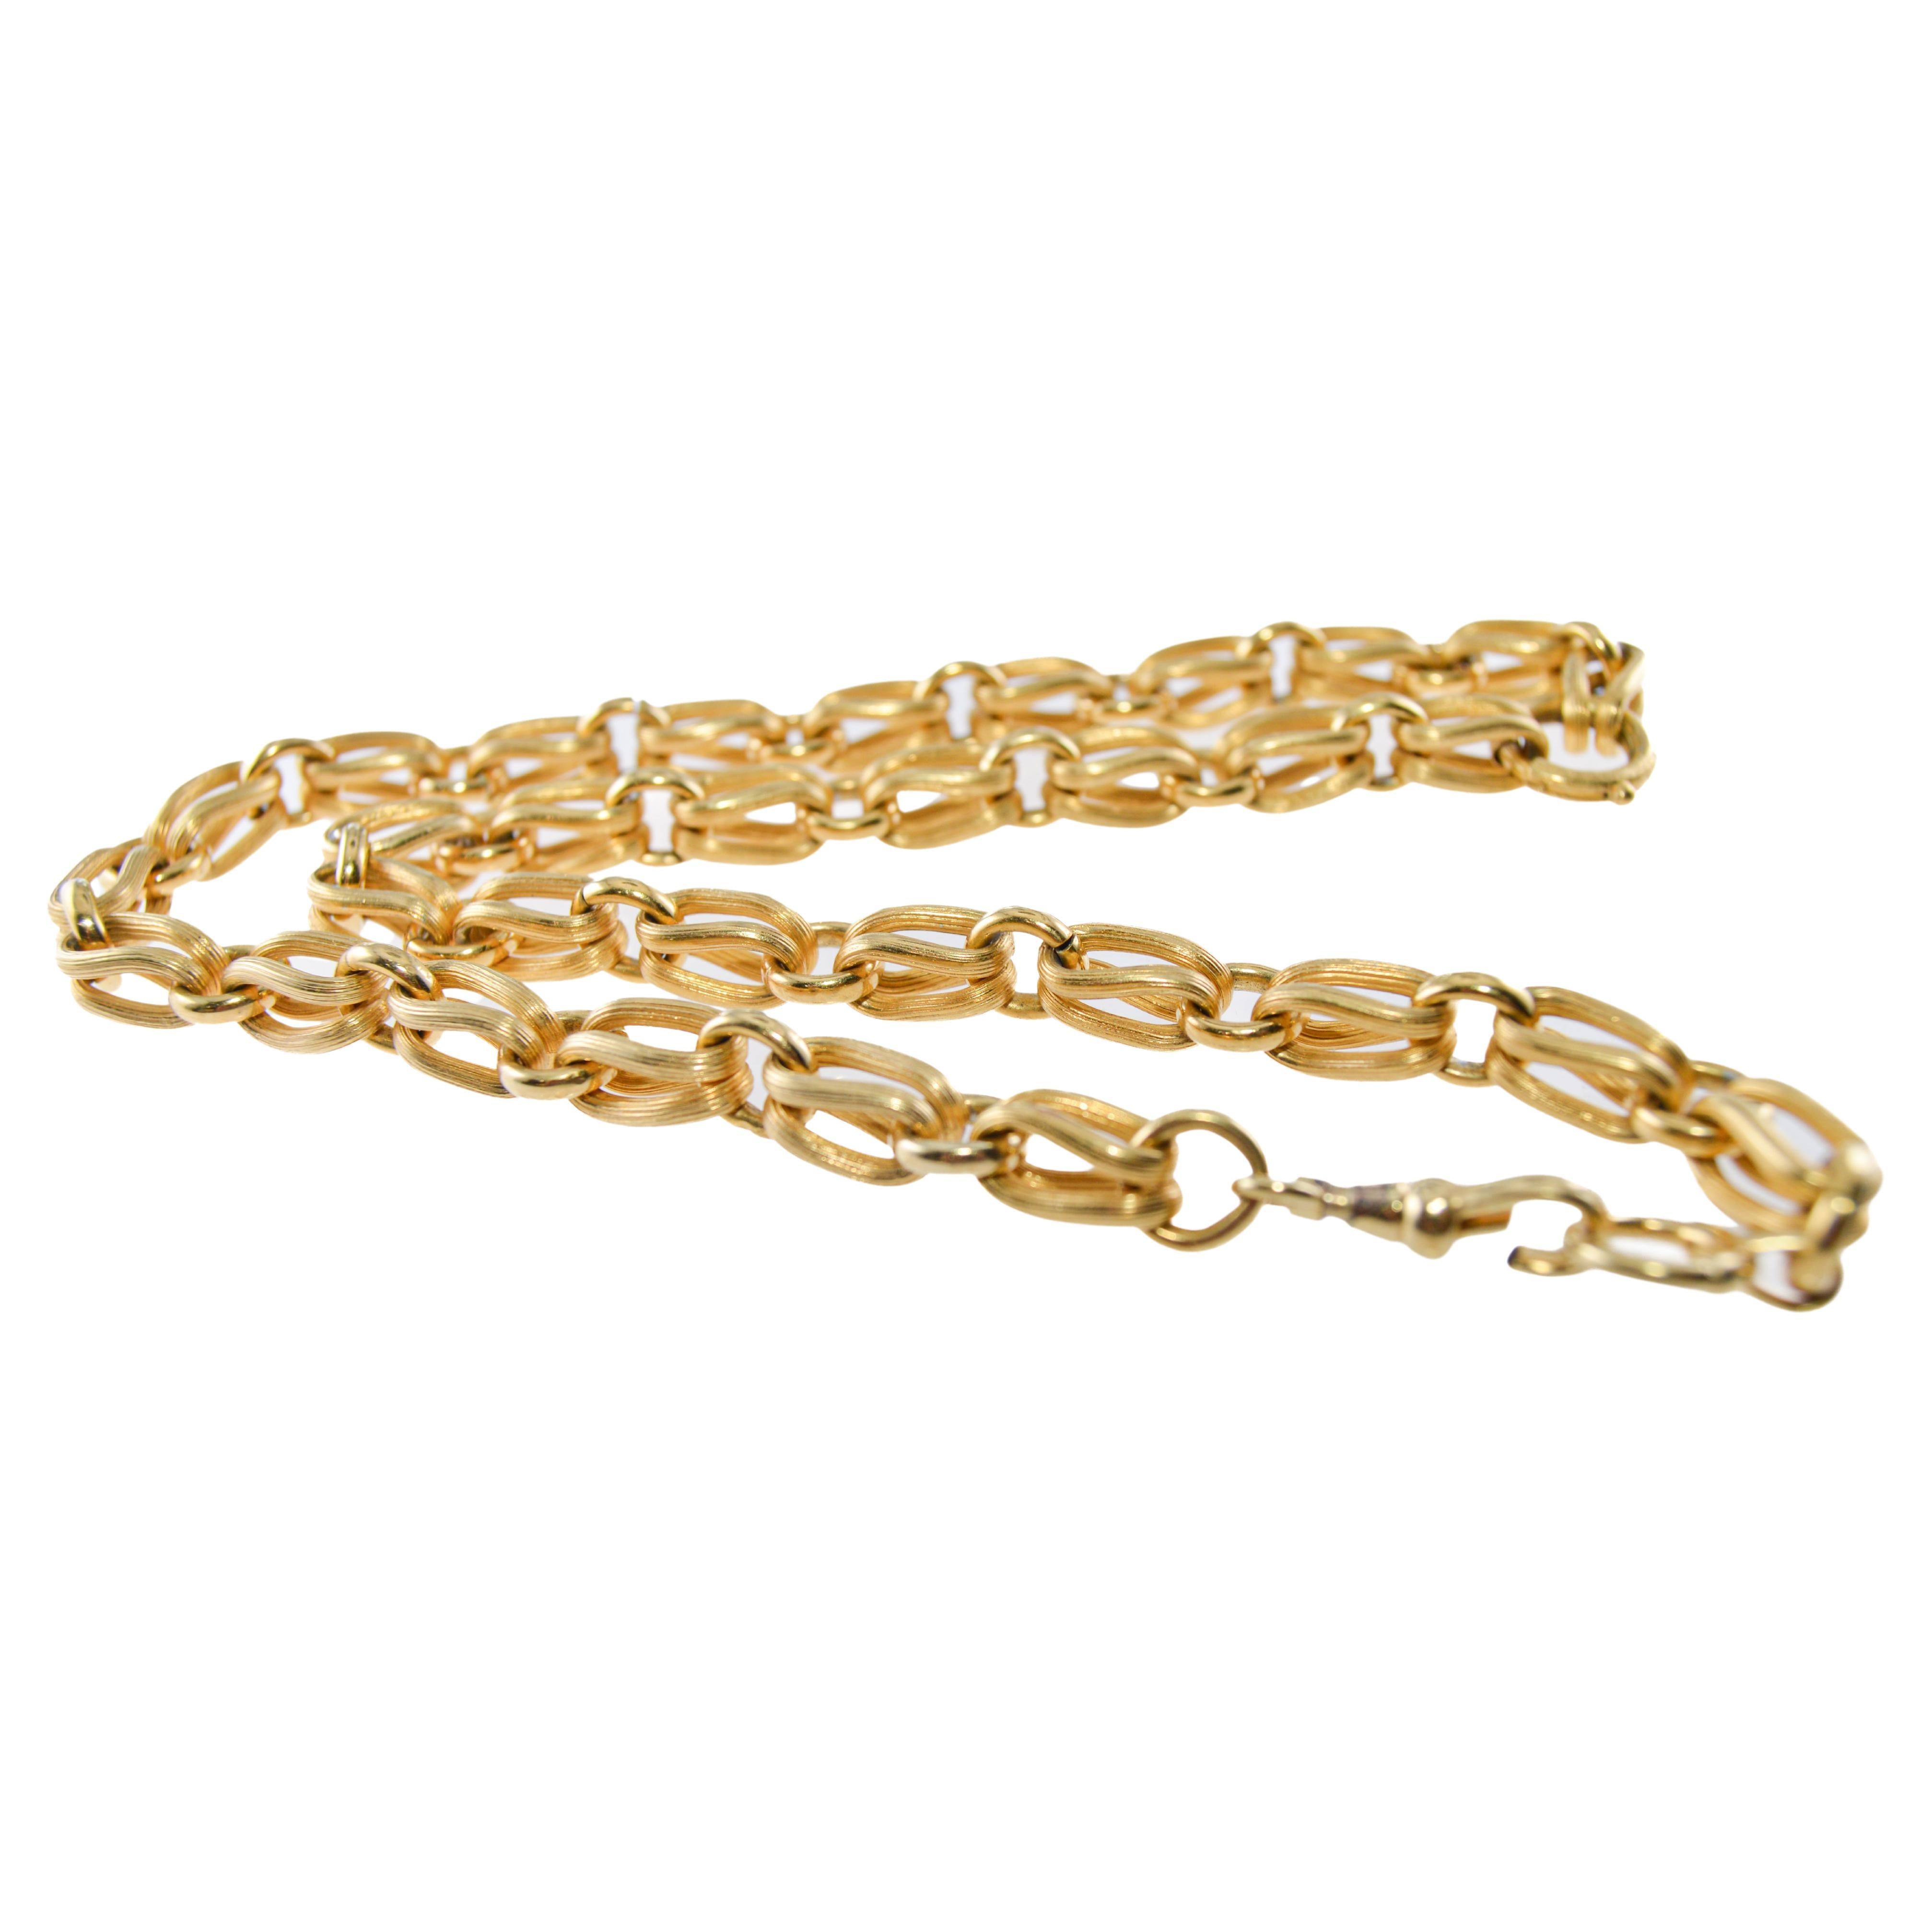 21 inch gold necklace